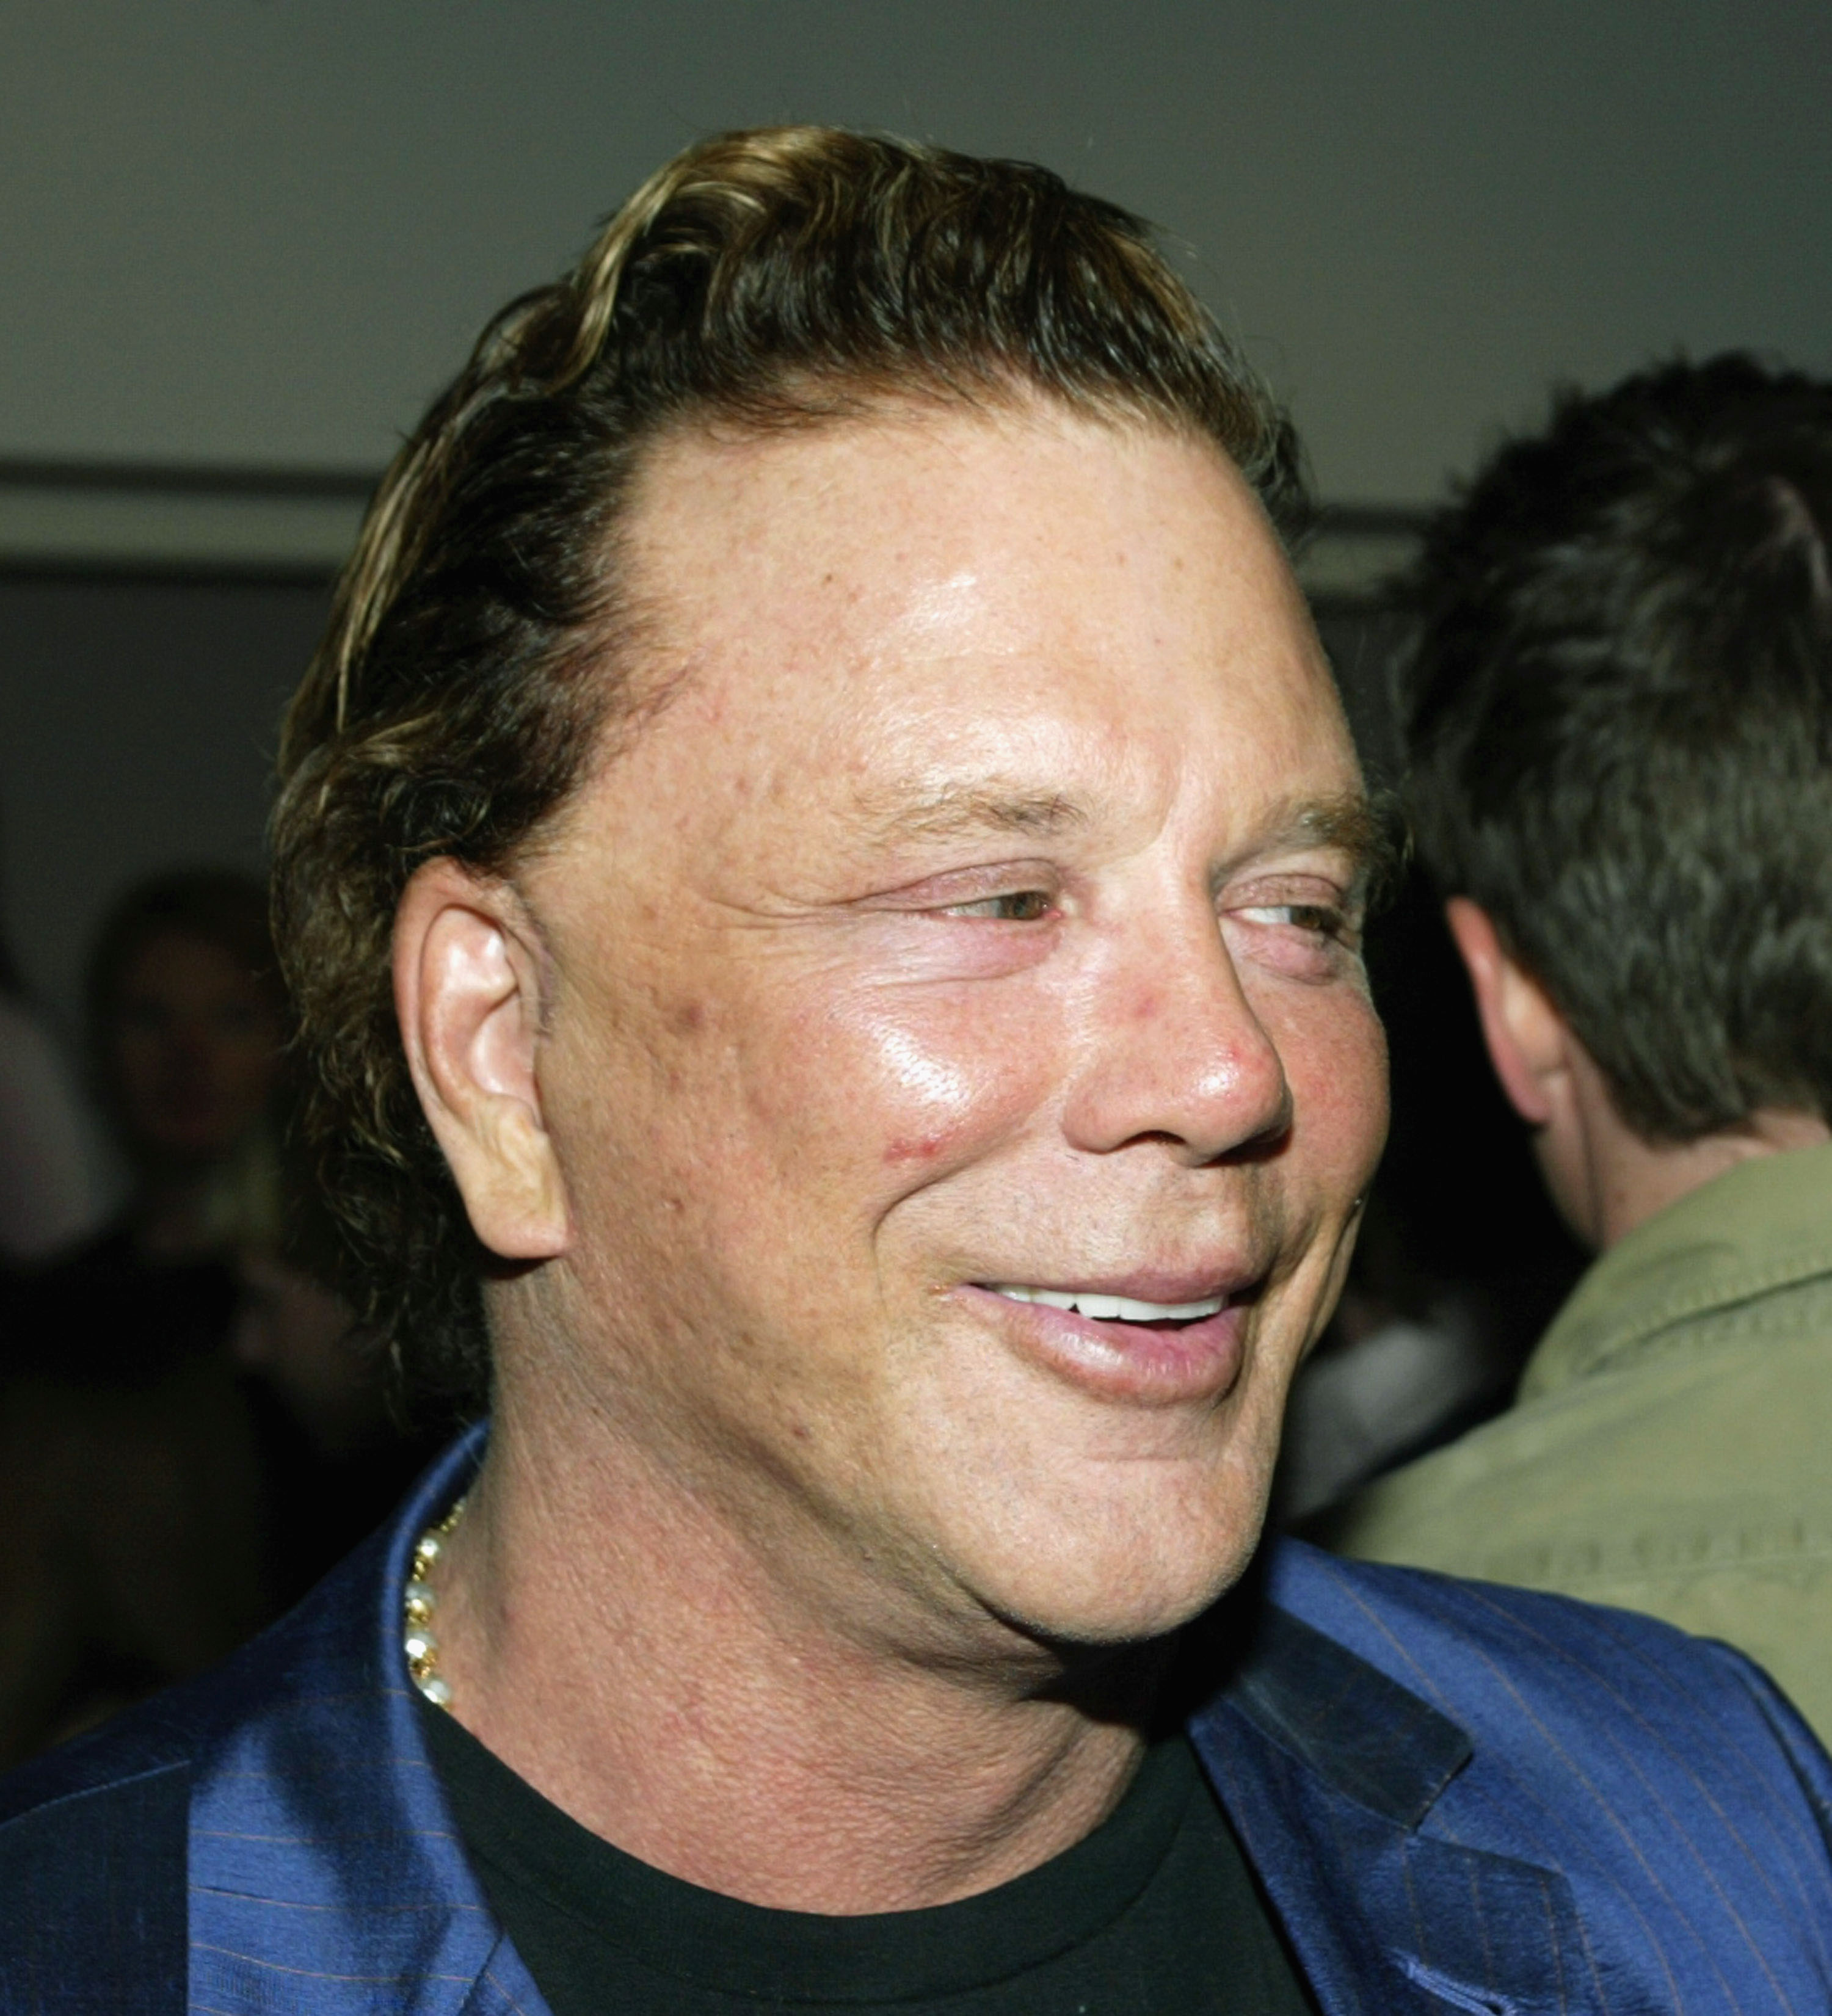 Mickey Rourke at TEN's presentation of Timothy Greenfield-Sanders event at Bergamont Station on April 1, 2005 in Santa Monica, California. | Source: Getty Images